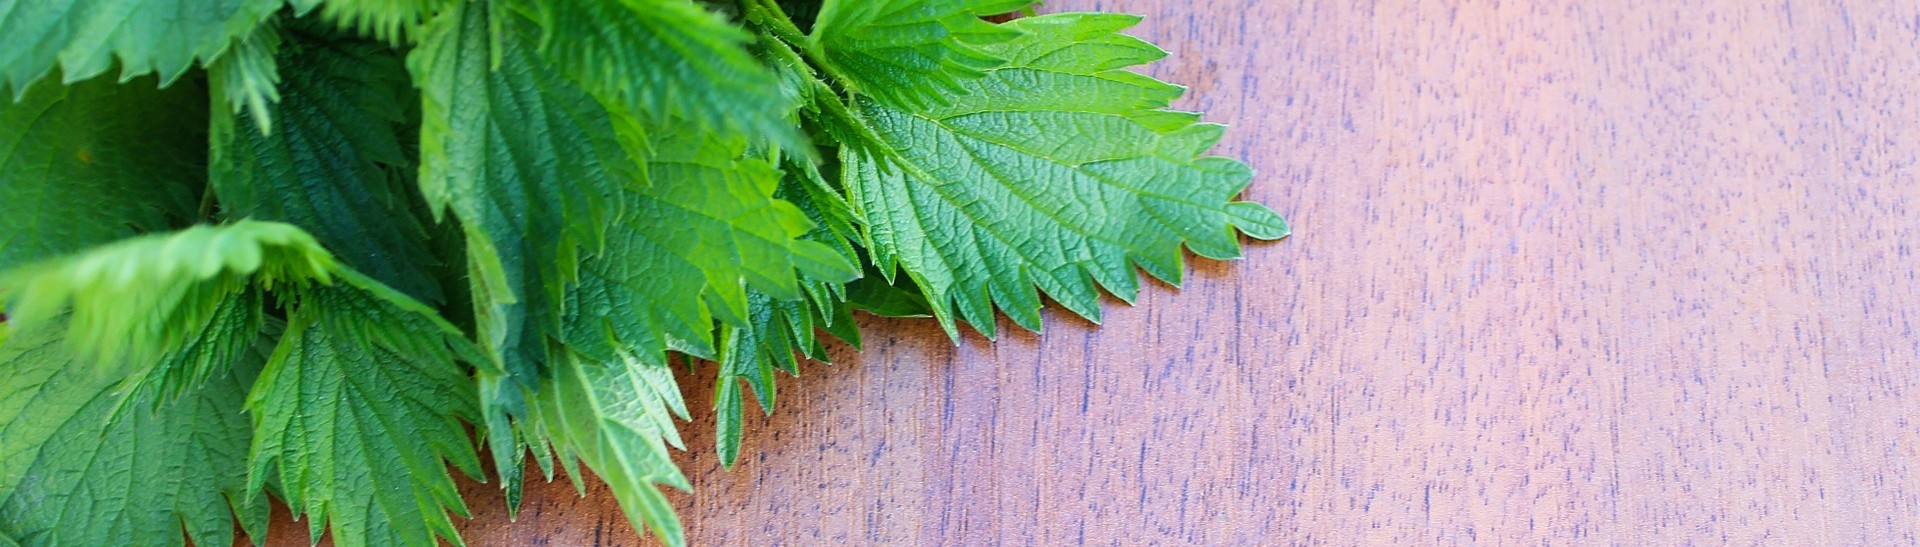 nettle-on-a-wooden-background-799938_1920